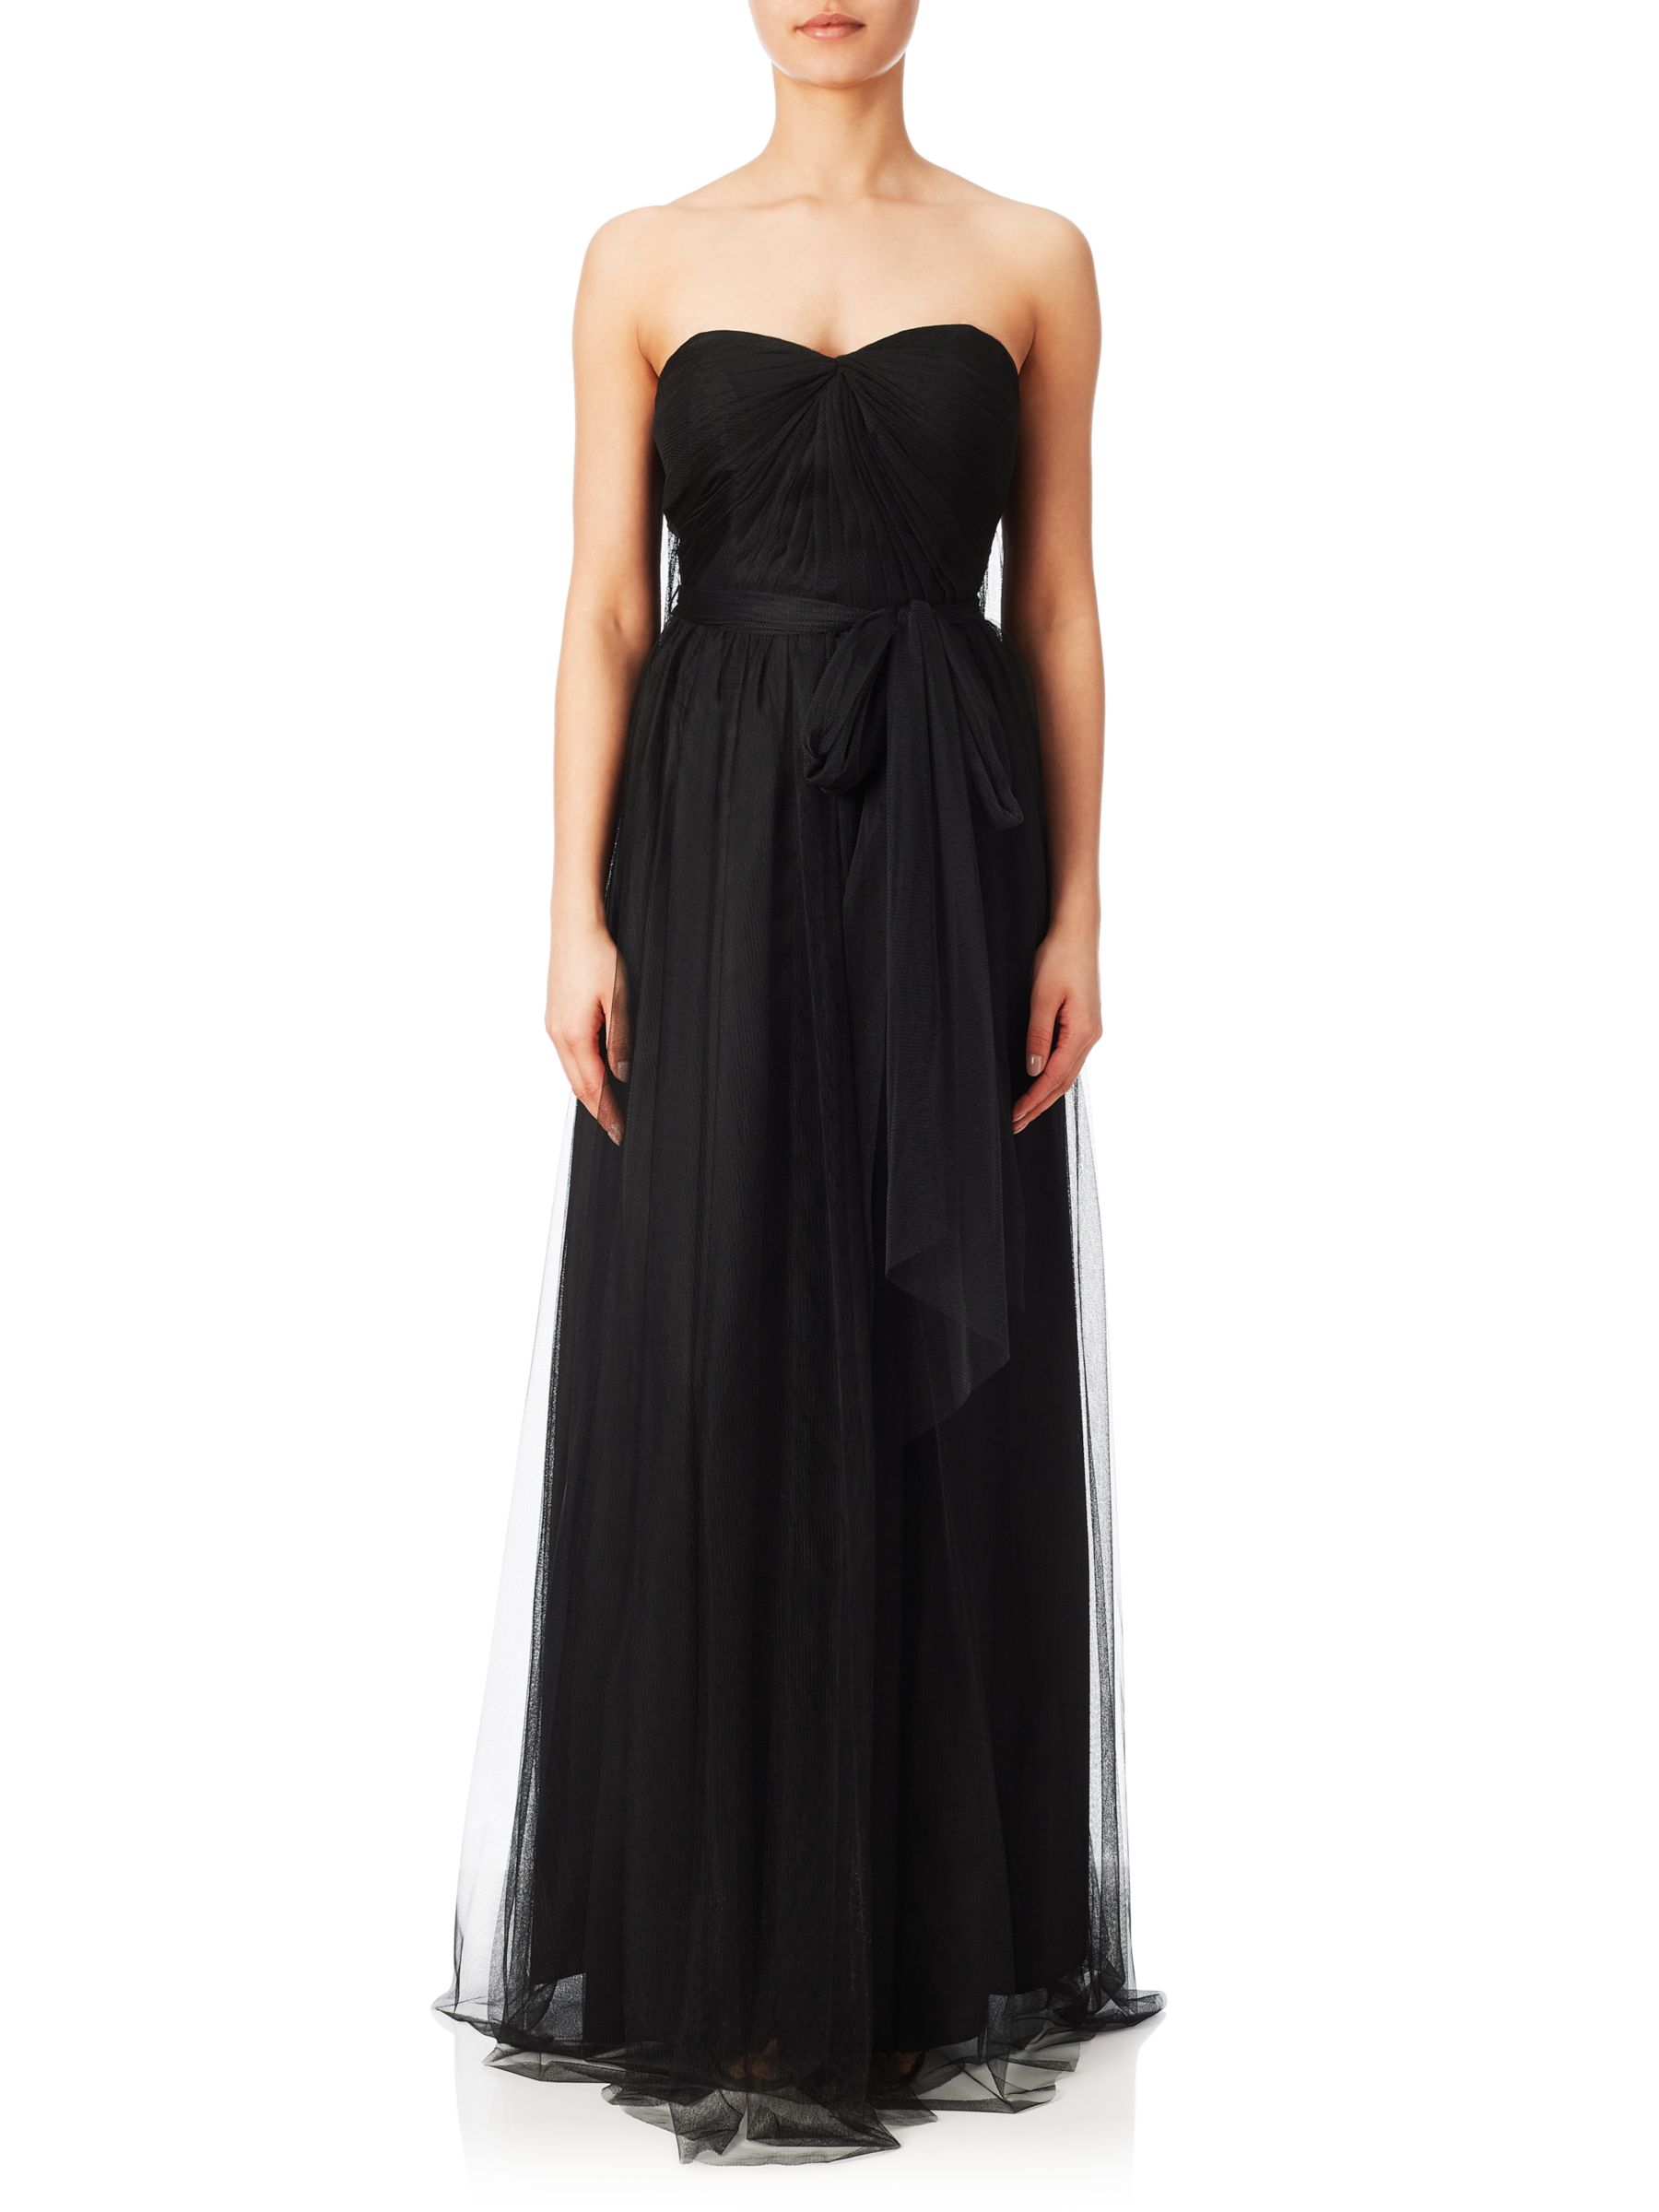 Adrianna Papell Strapless Infinity Tulle Gown, Black